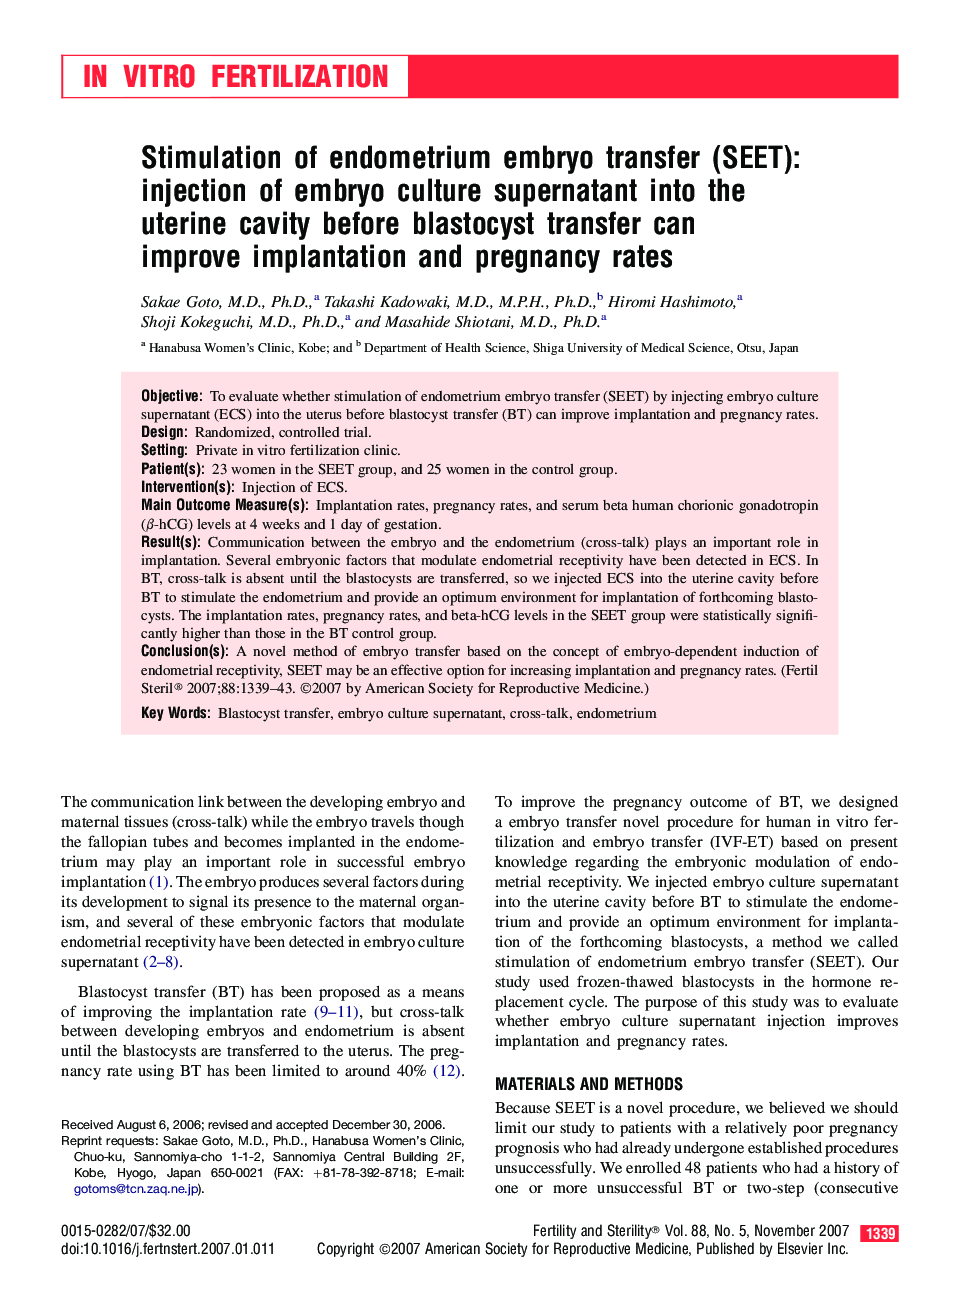 Stimulation of endometrium embryo transfer (SEET): injection of embryo culture supernatant into the uterine cavity before blastocyst transfer can improve implantation and pregnancy rates